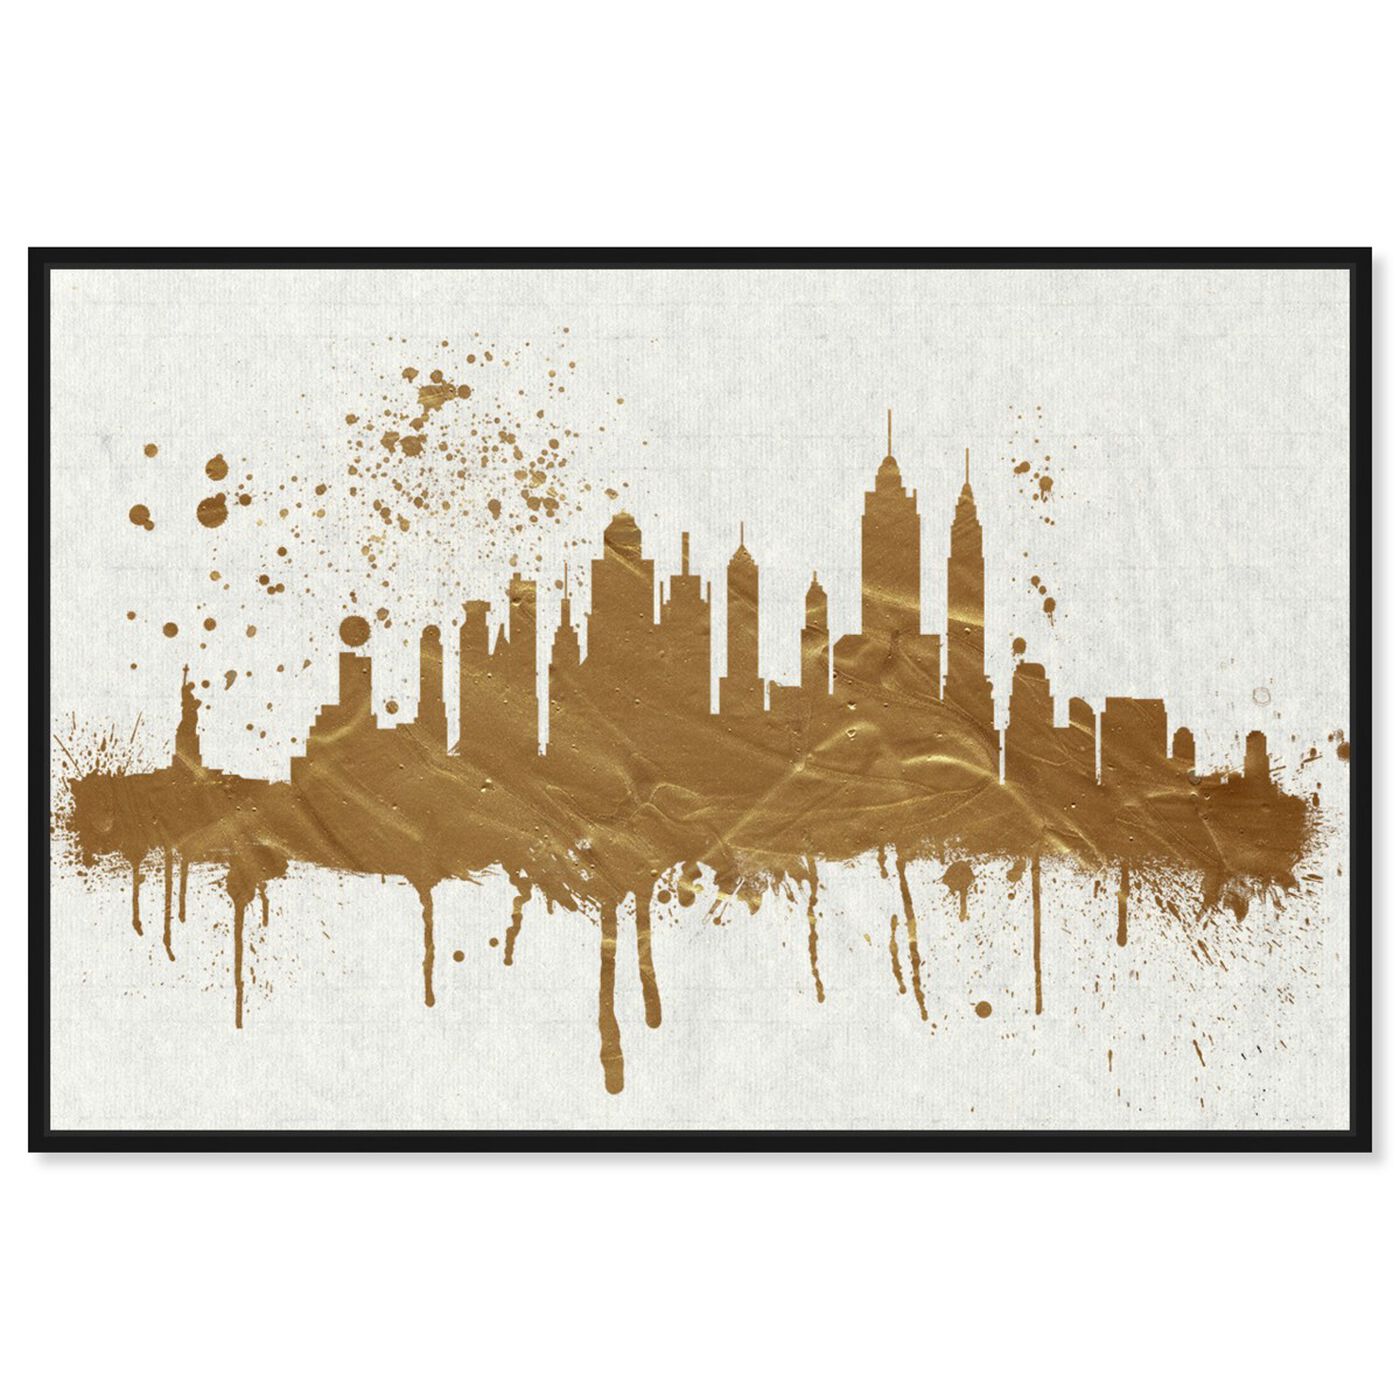 Gold NY Skyline | Cities and Skylines Wall Art by Oliver Gal | Bilder